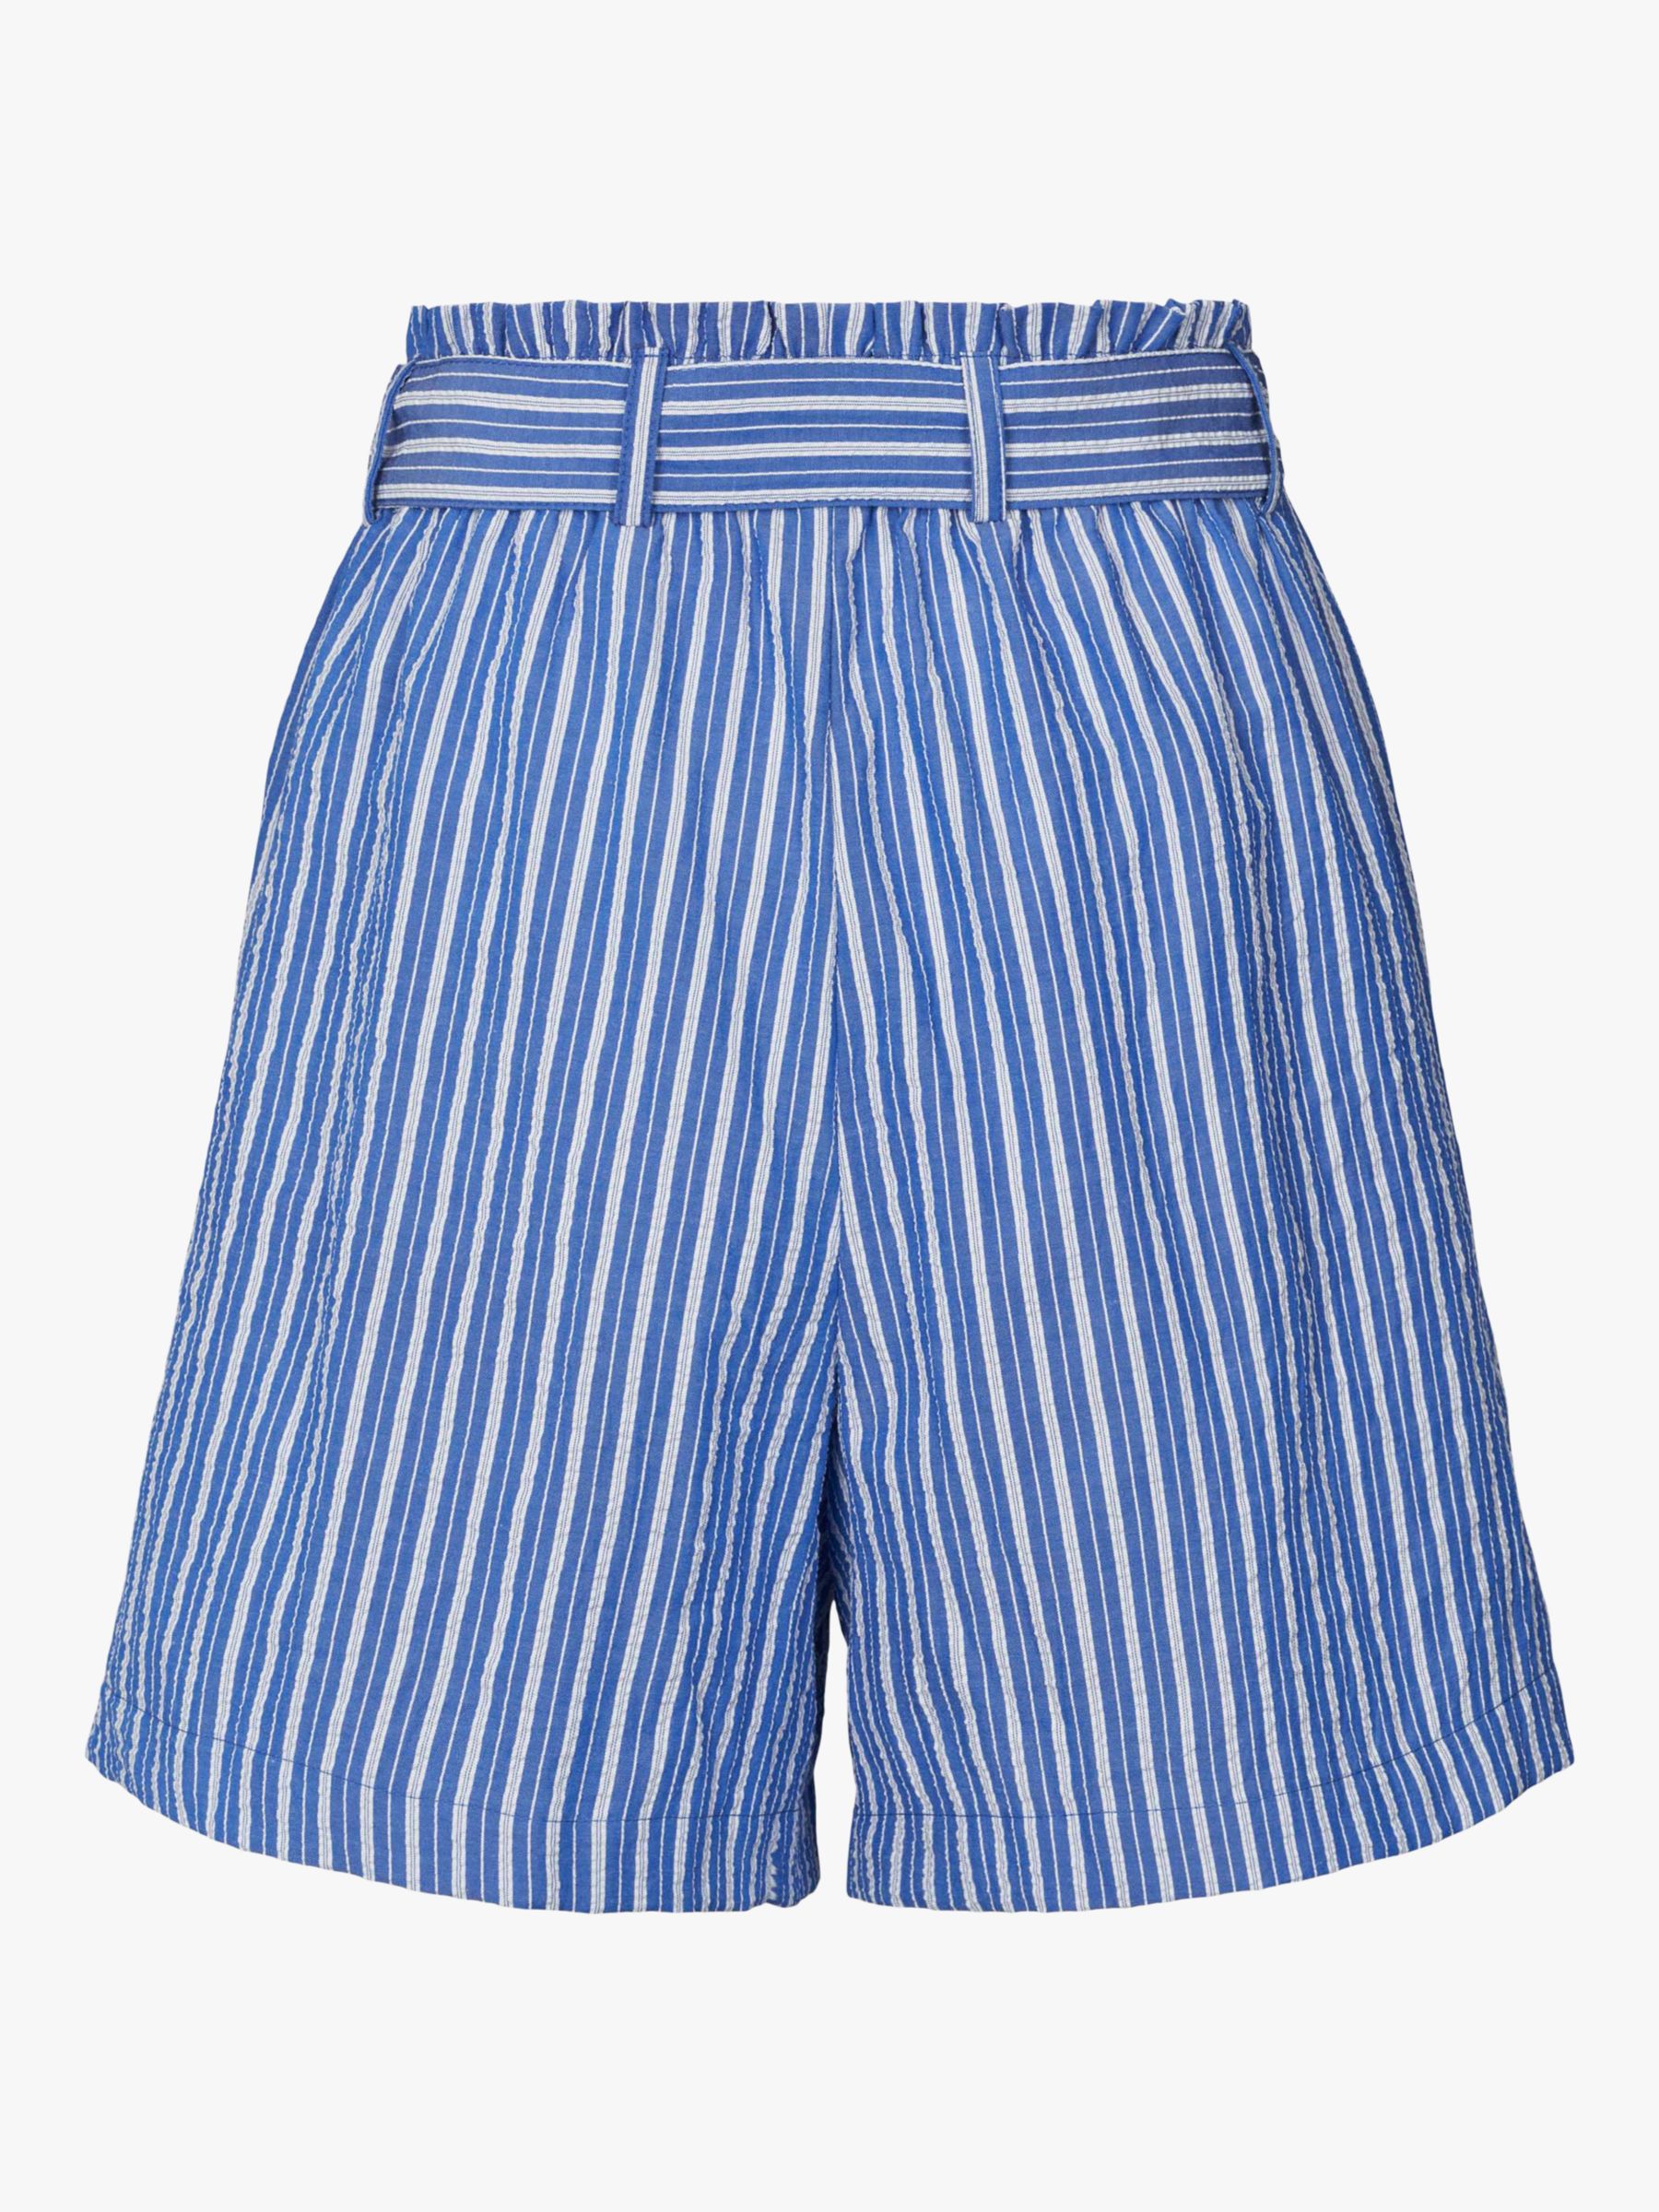 Lollys Laundry Striped Blanca Shorts, Blue at John Lewis & Partners